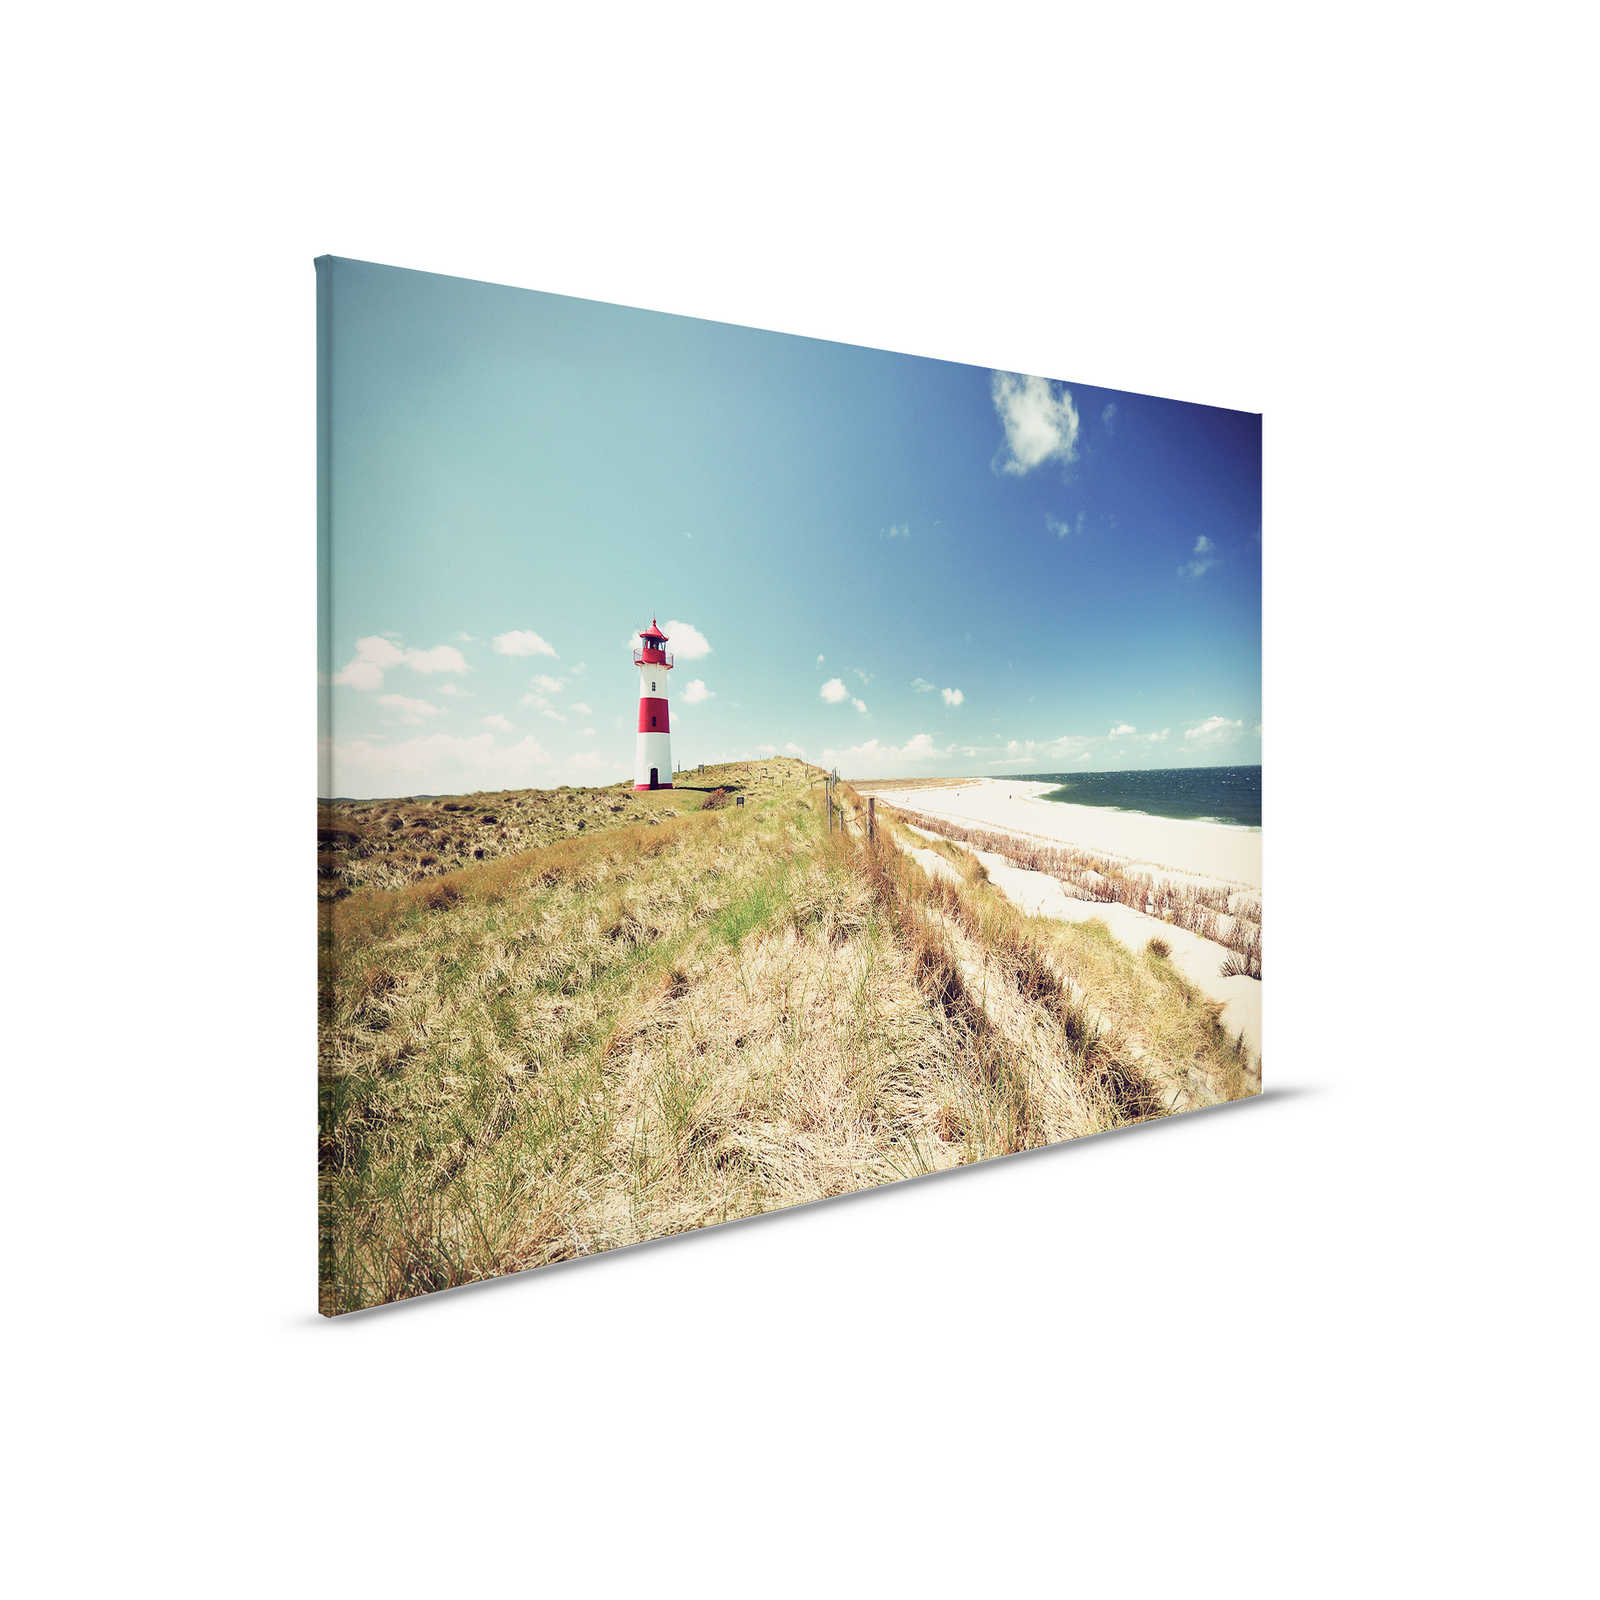         Canvas with beach landscape with lighthouse - 0.90 m x 0.60 m
    